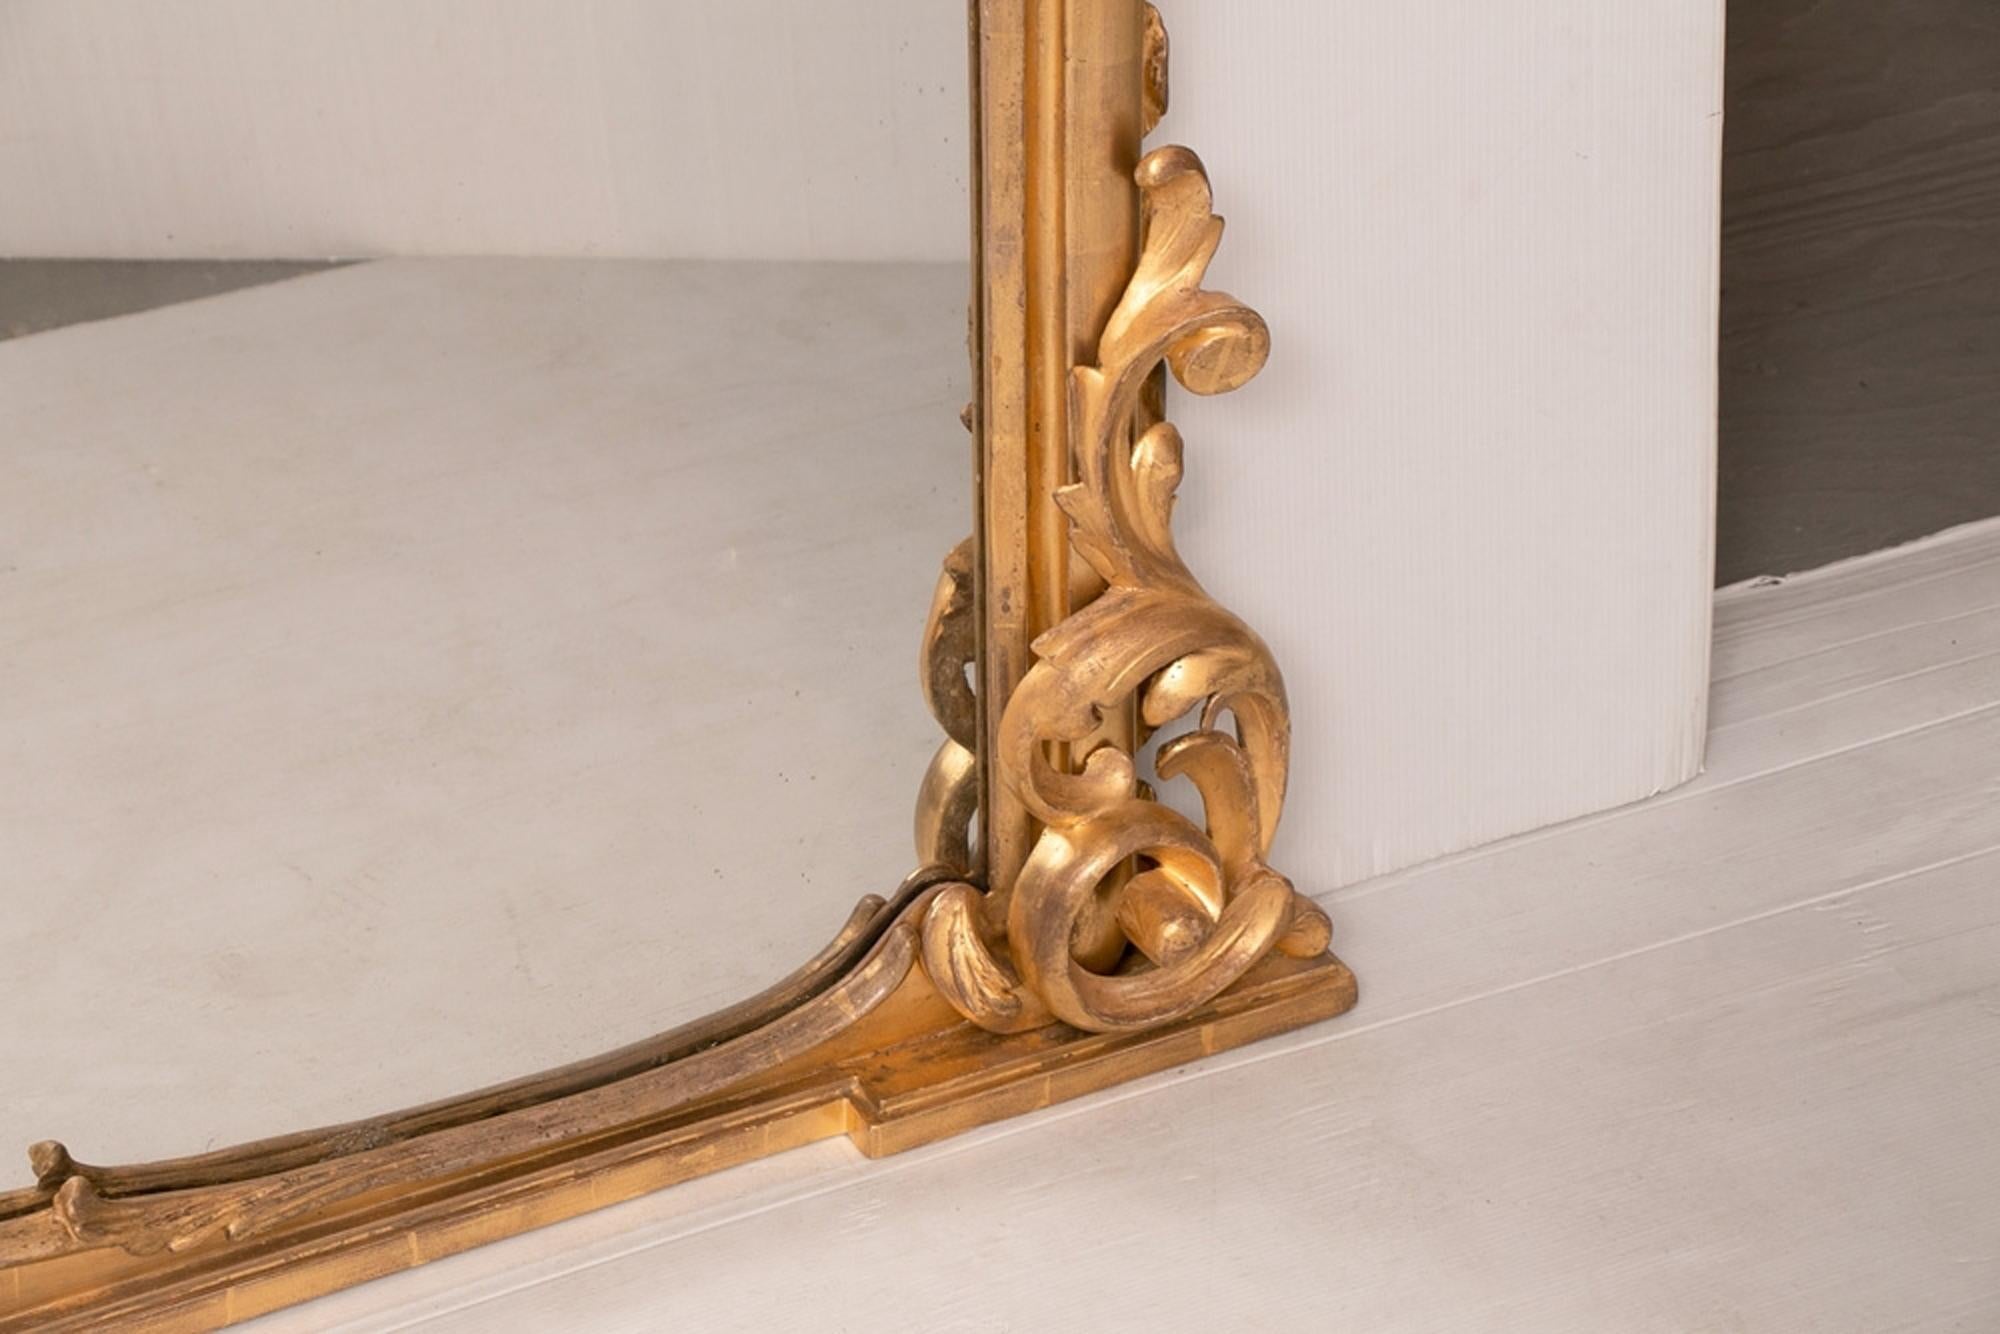 Large antique giltwood overmantle mirror circa 1820-1830. Sizes 153 cm high, 143cm wide at top, 132cm wide at base. This stunning example retains it's original watergilding in the most wonderful state of preservation. Original mercury mirror plate